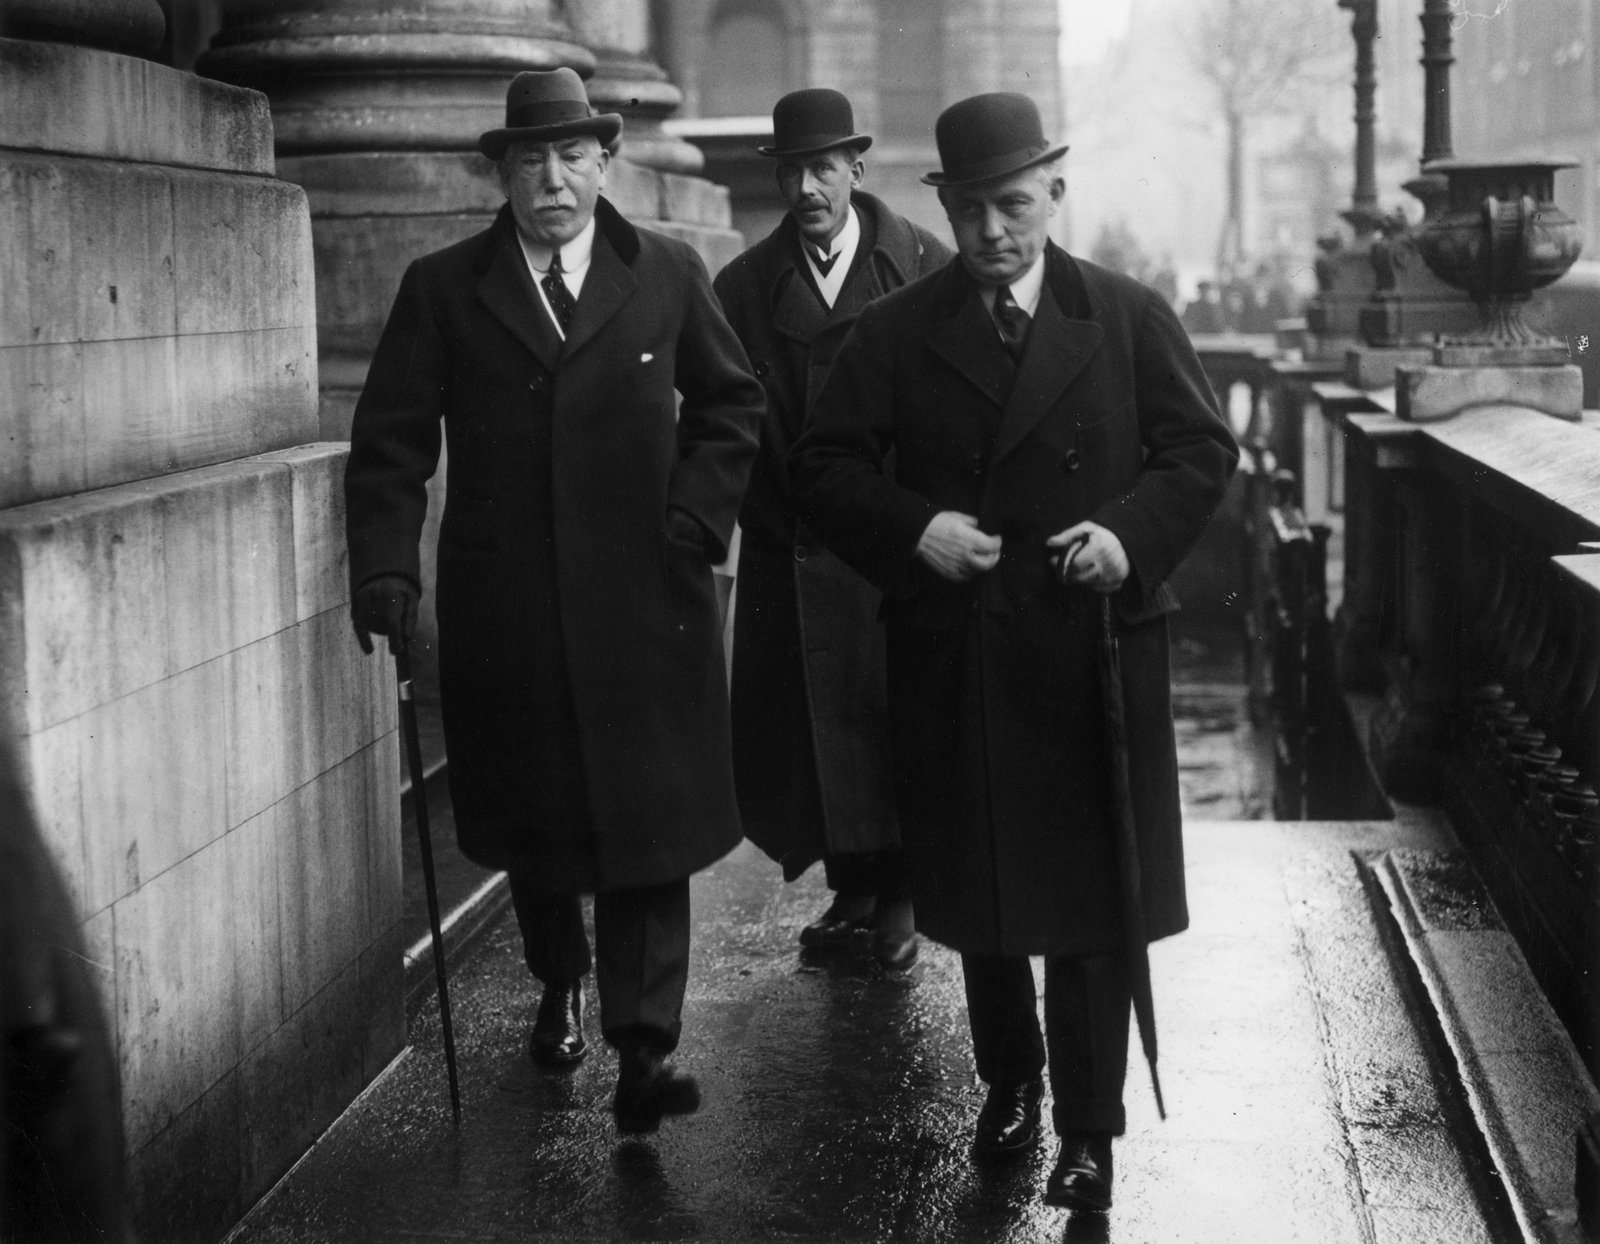 Image - A stony-faced James Craig leaves City Hall Dublin after an acrimonious meeting with Michael Collins, February 1922 (Getty Images)